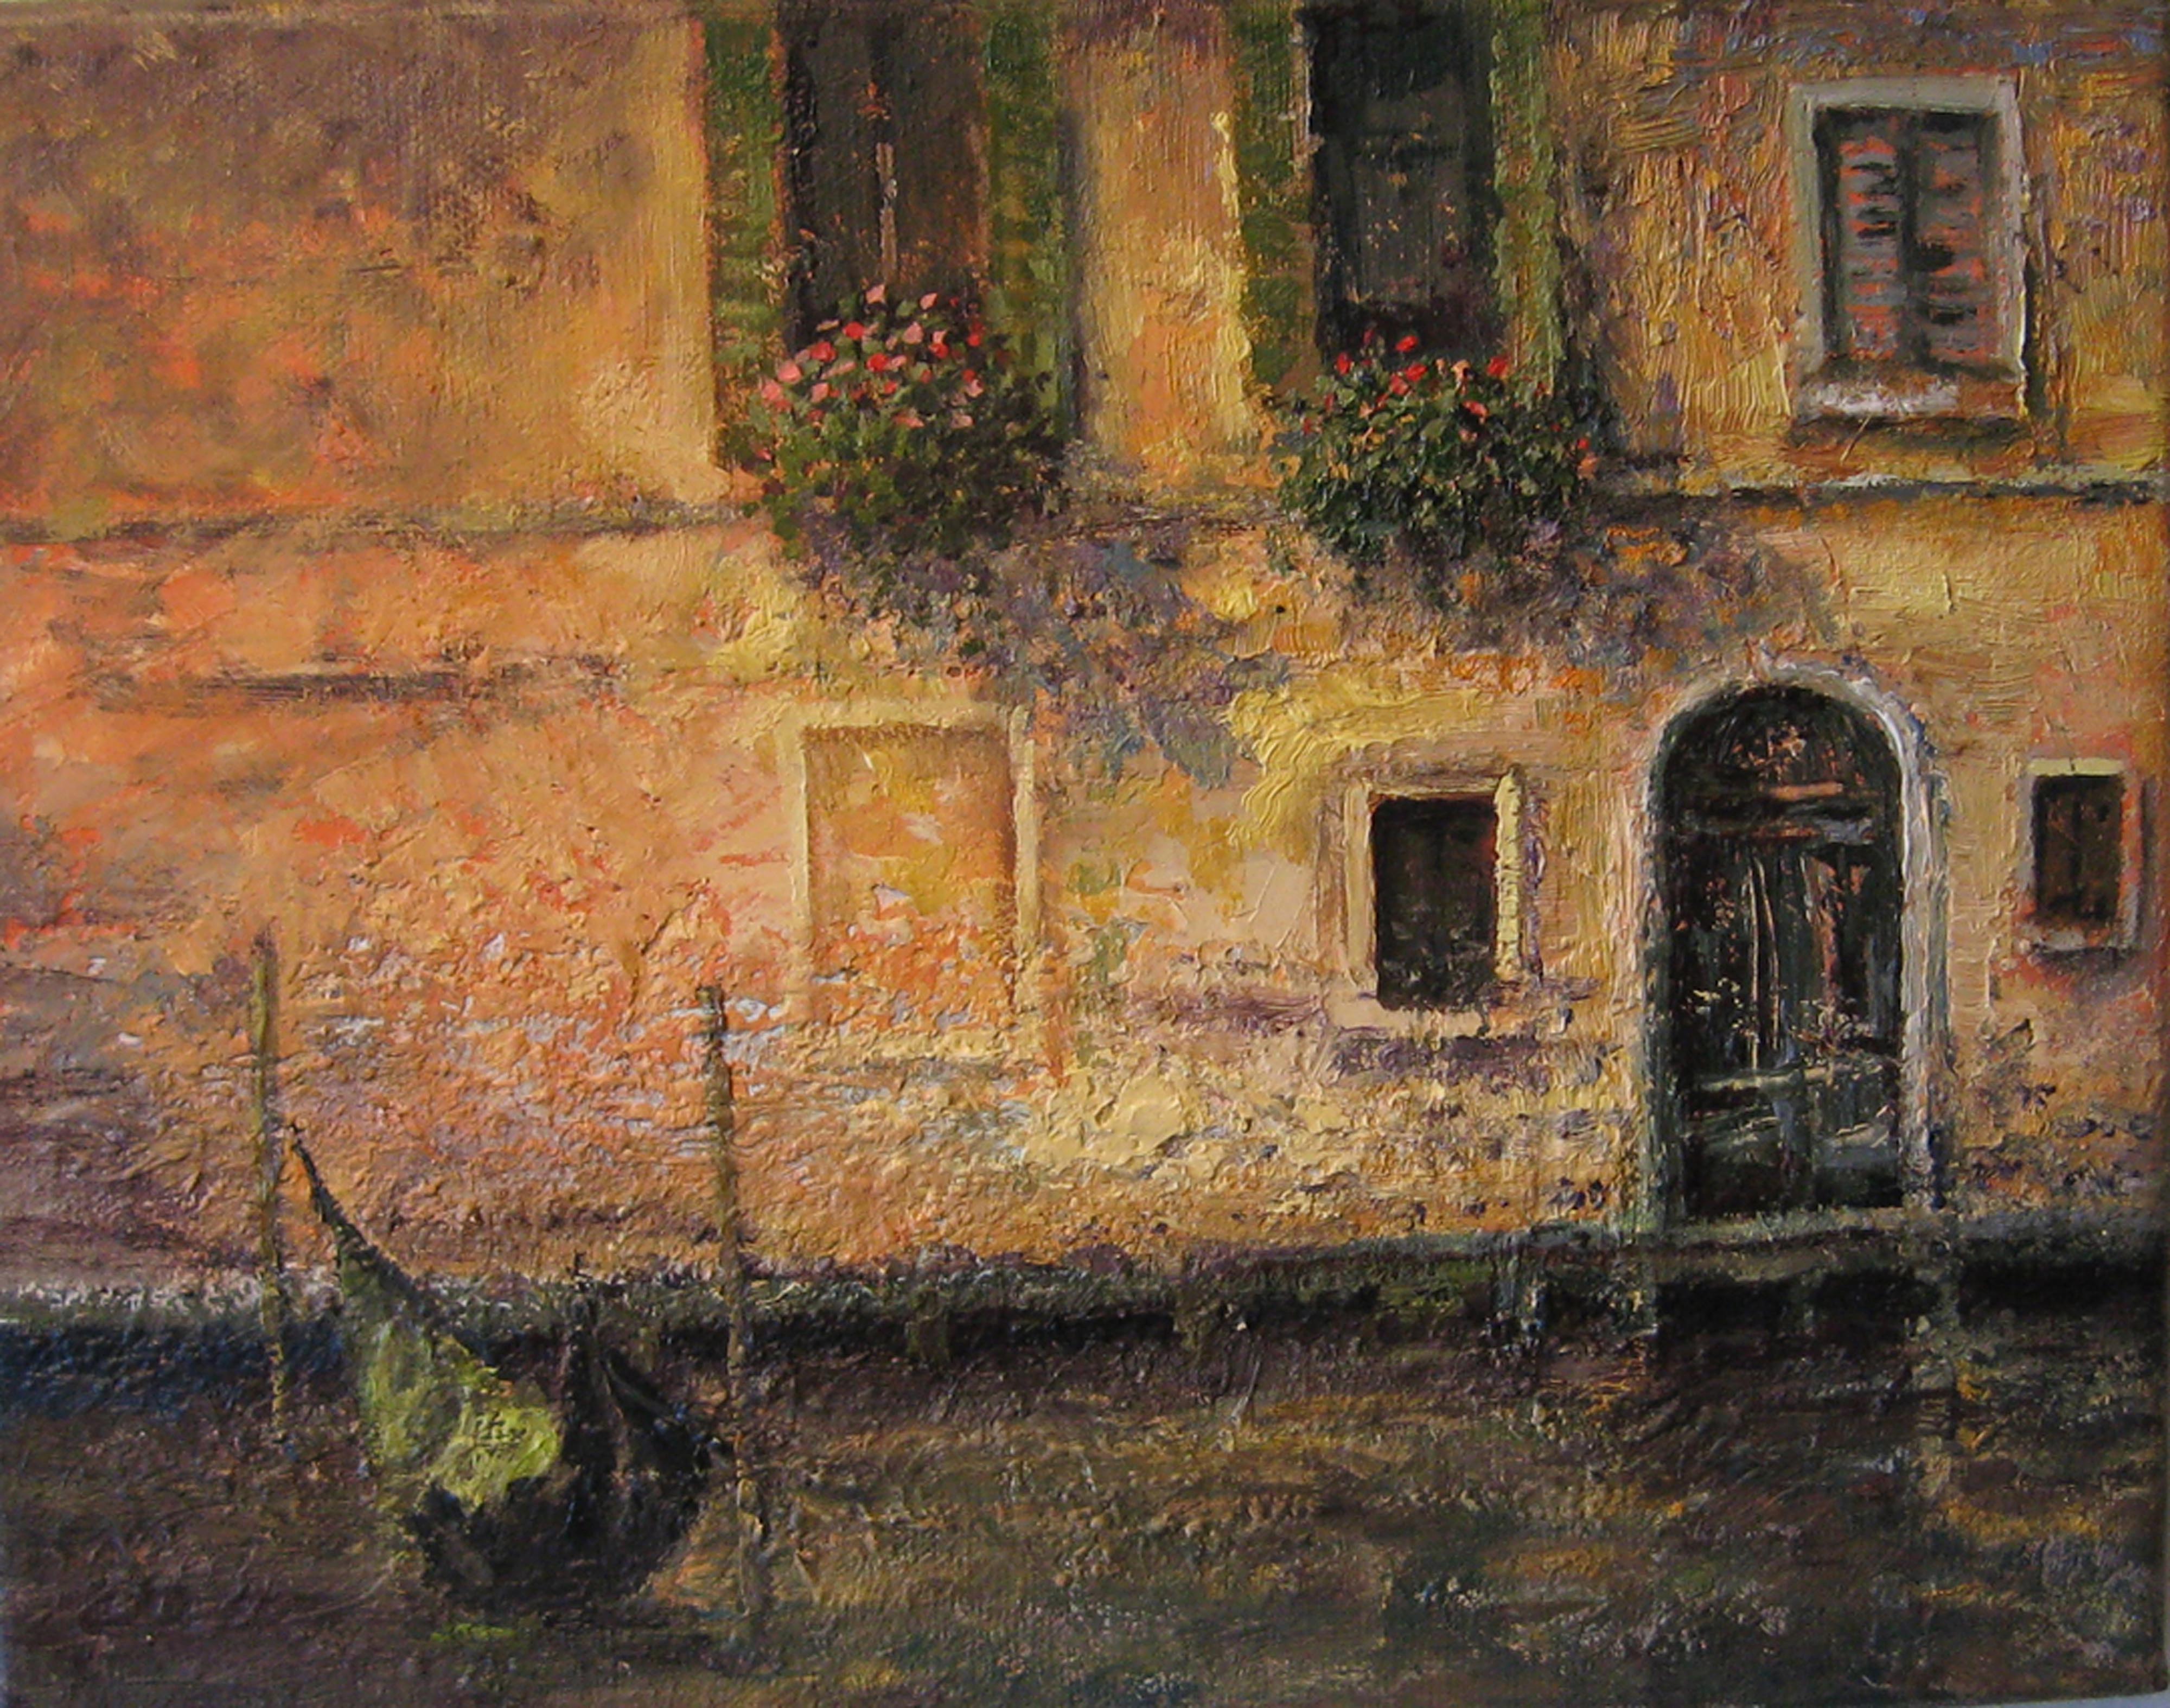 Venice, oil on canvas by Frank Stock